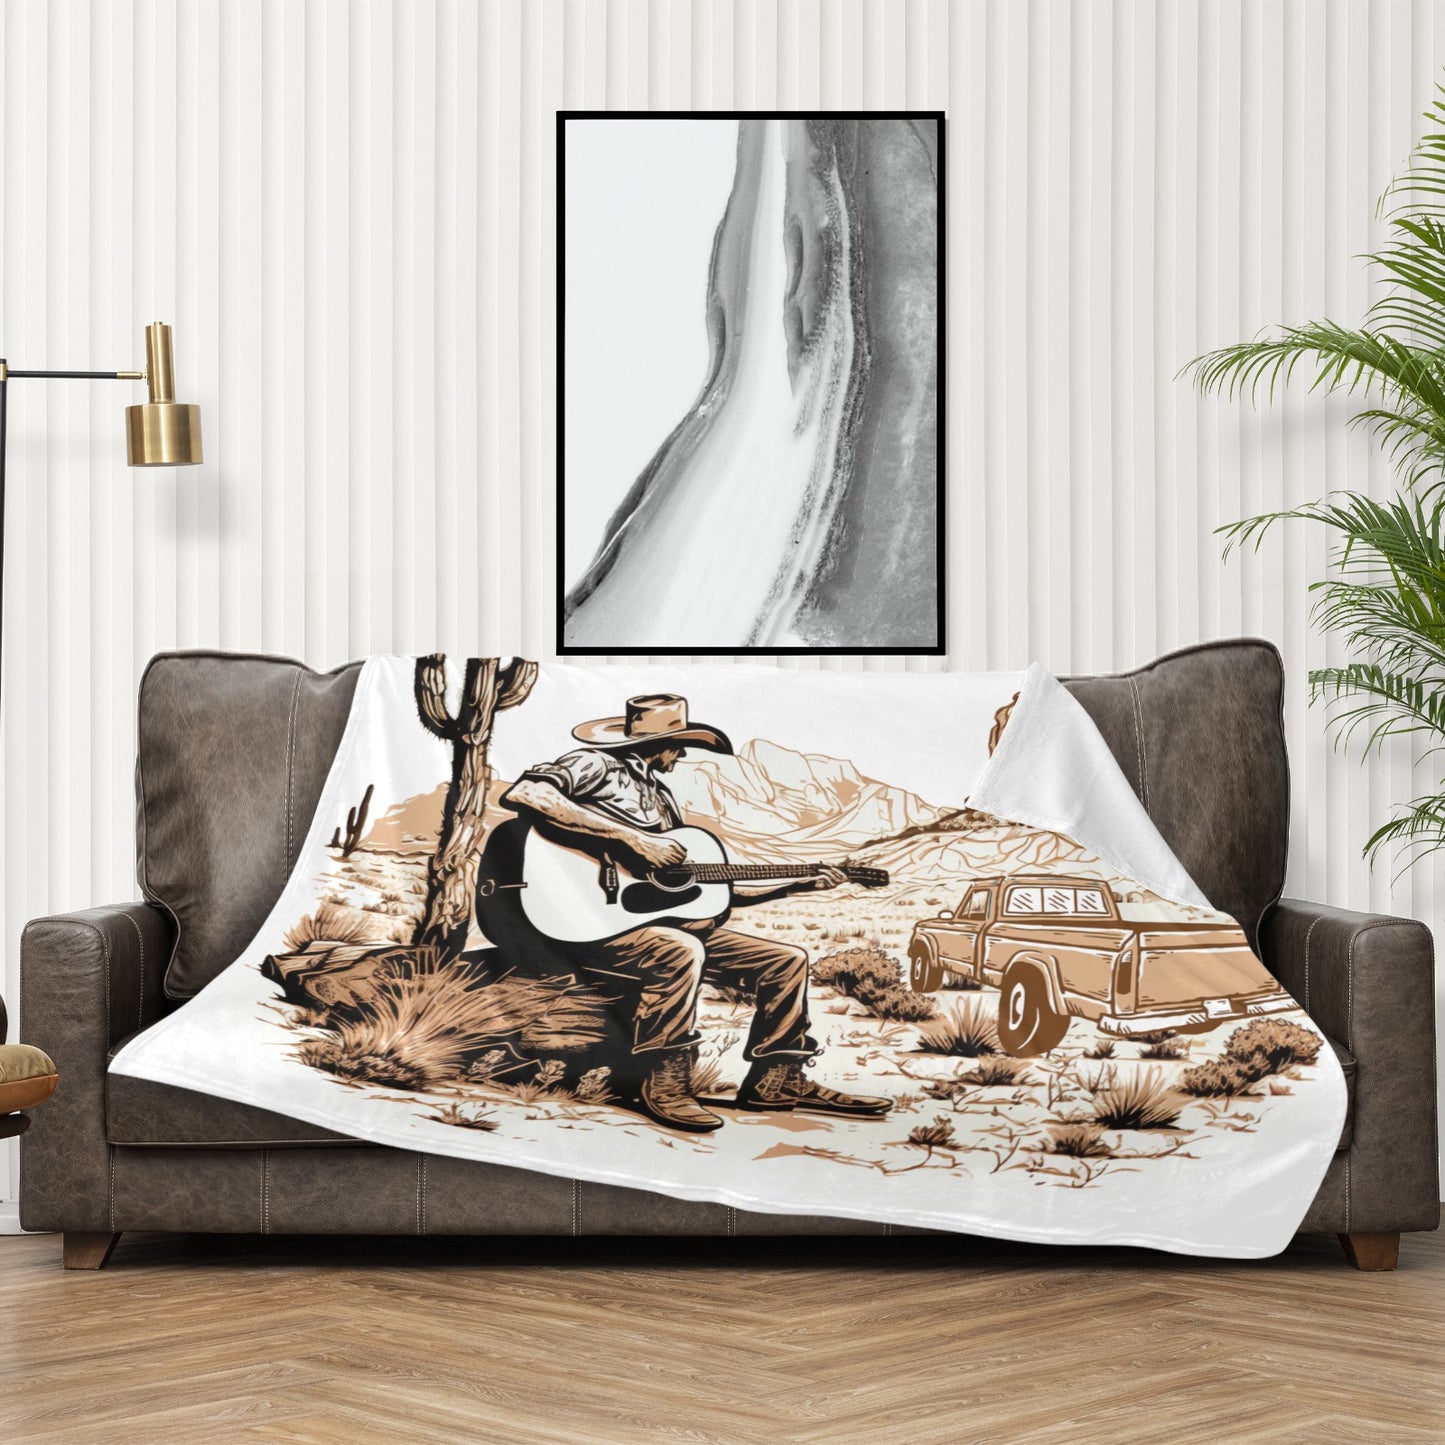 Cowboy With Guitar 50" x 60" Blanket Throw